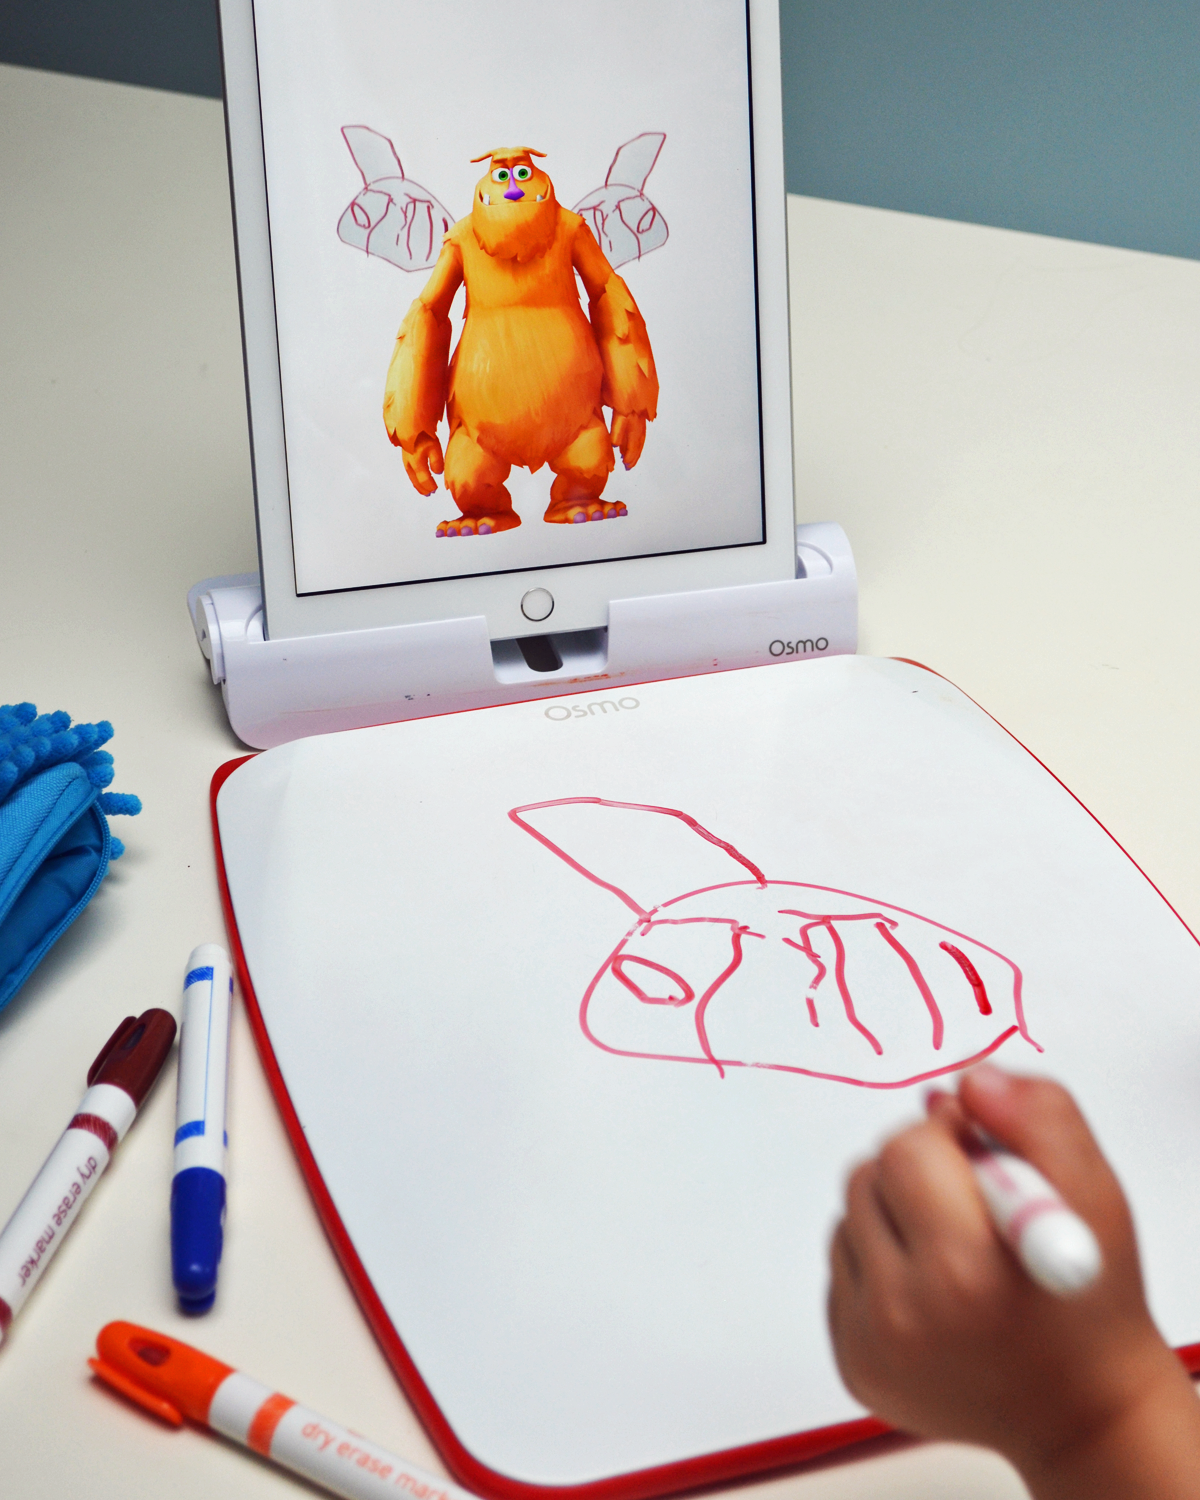 Osmo Monster a tactile drawing game that marries your doodle with technology.